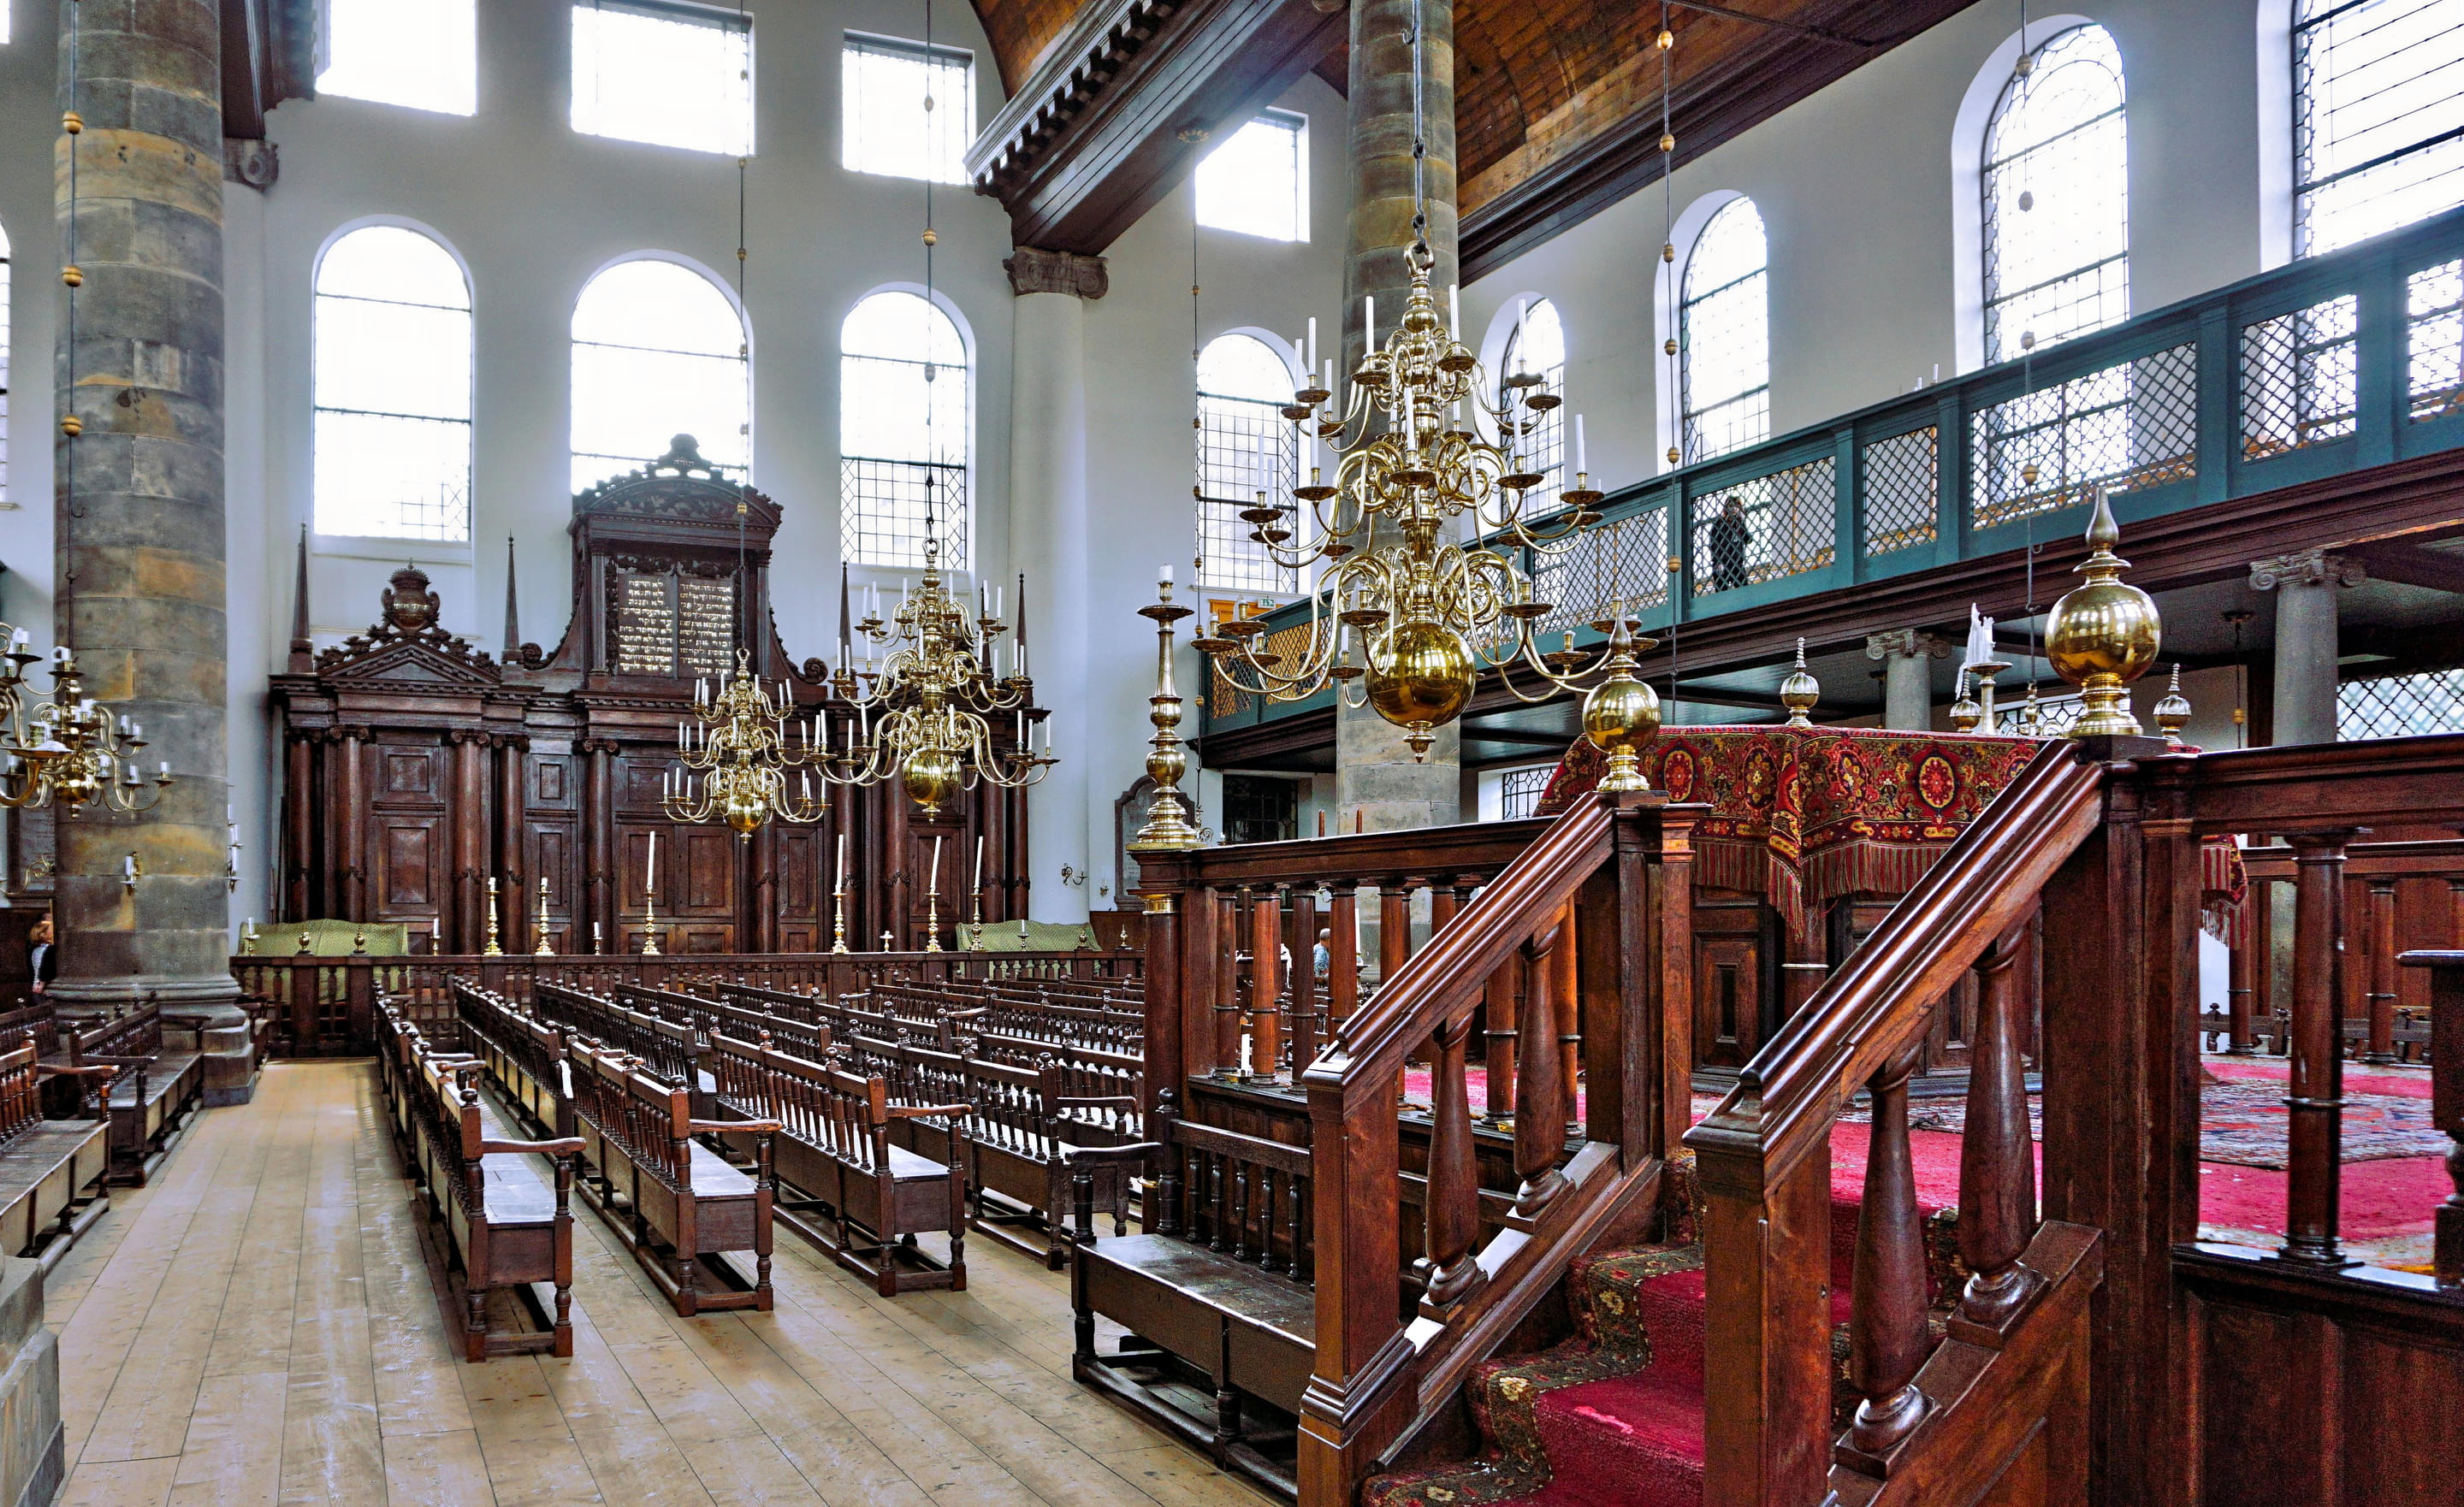 Portuguese Synagogue Overview